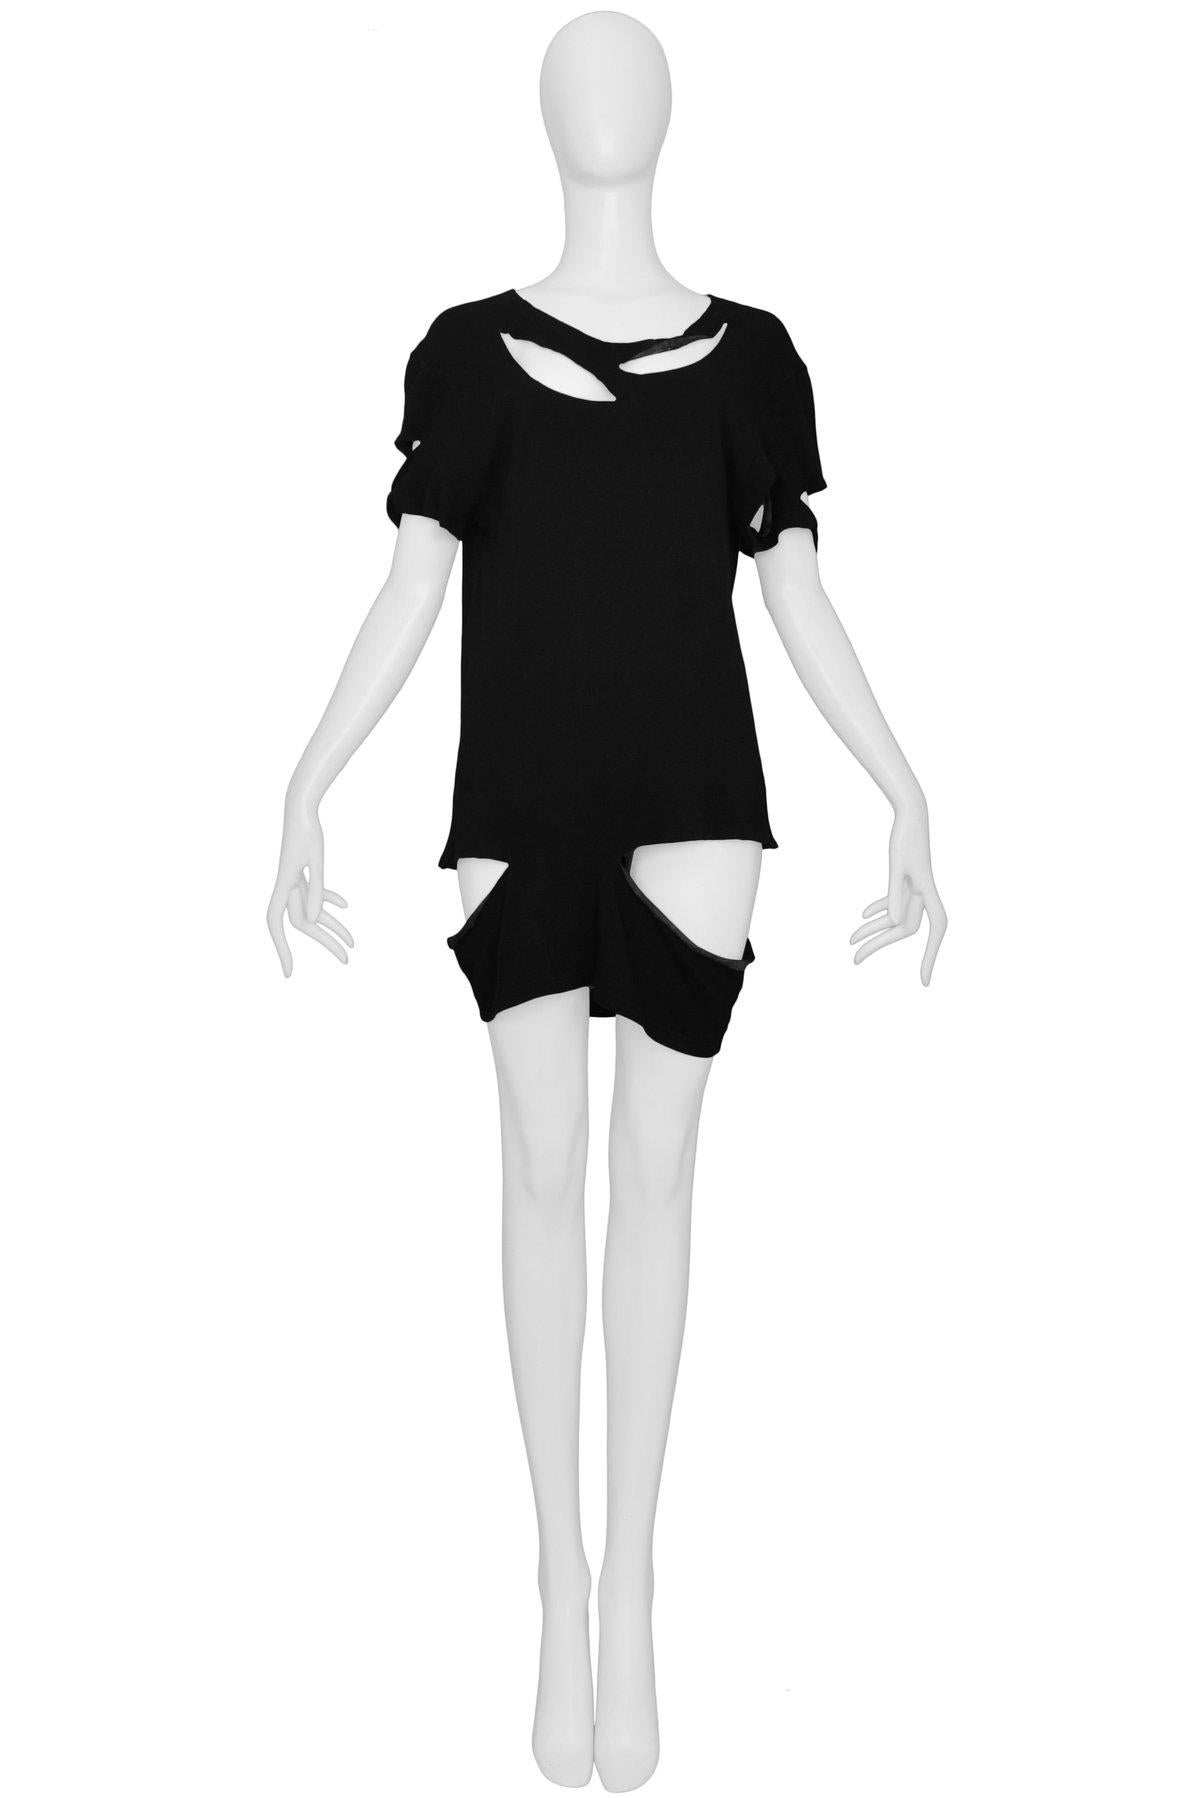 Resurrection Vintage is excited to offer a vintage Maison Martin Margiela black cotton and wool jersey tunic top featuring short sleeves, tunic length, scoop neckline, and multiple slashes with a rubberized interior finish. 

Maison Martin